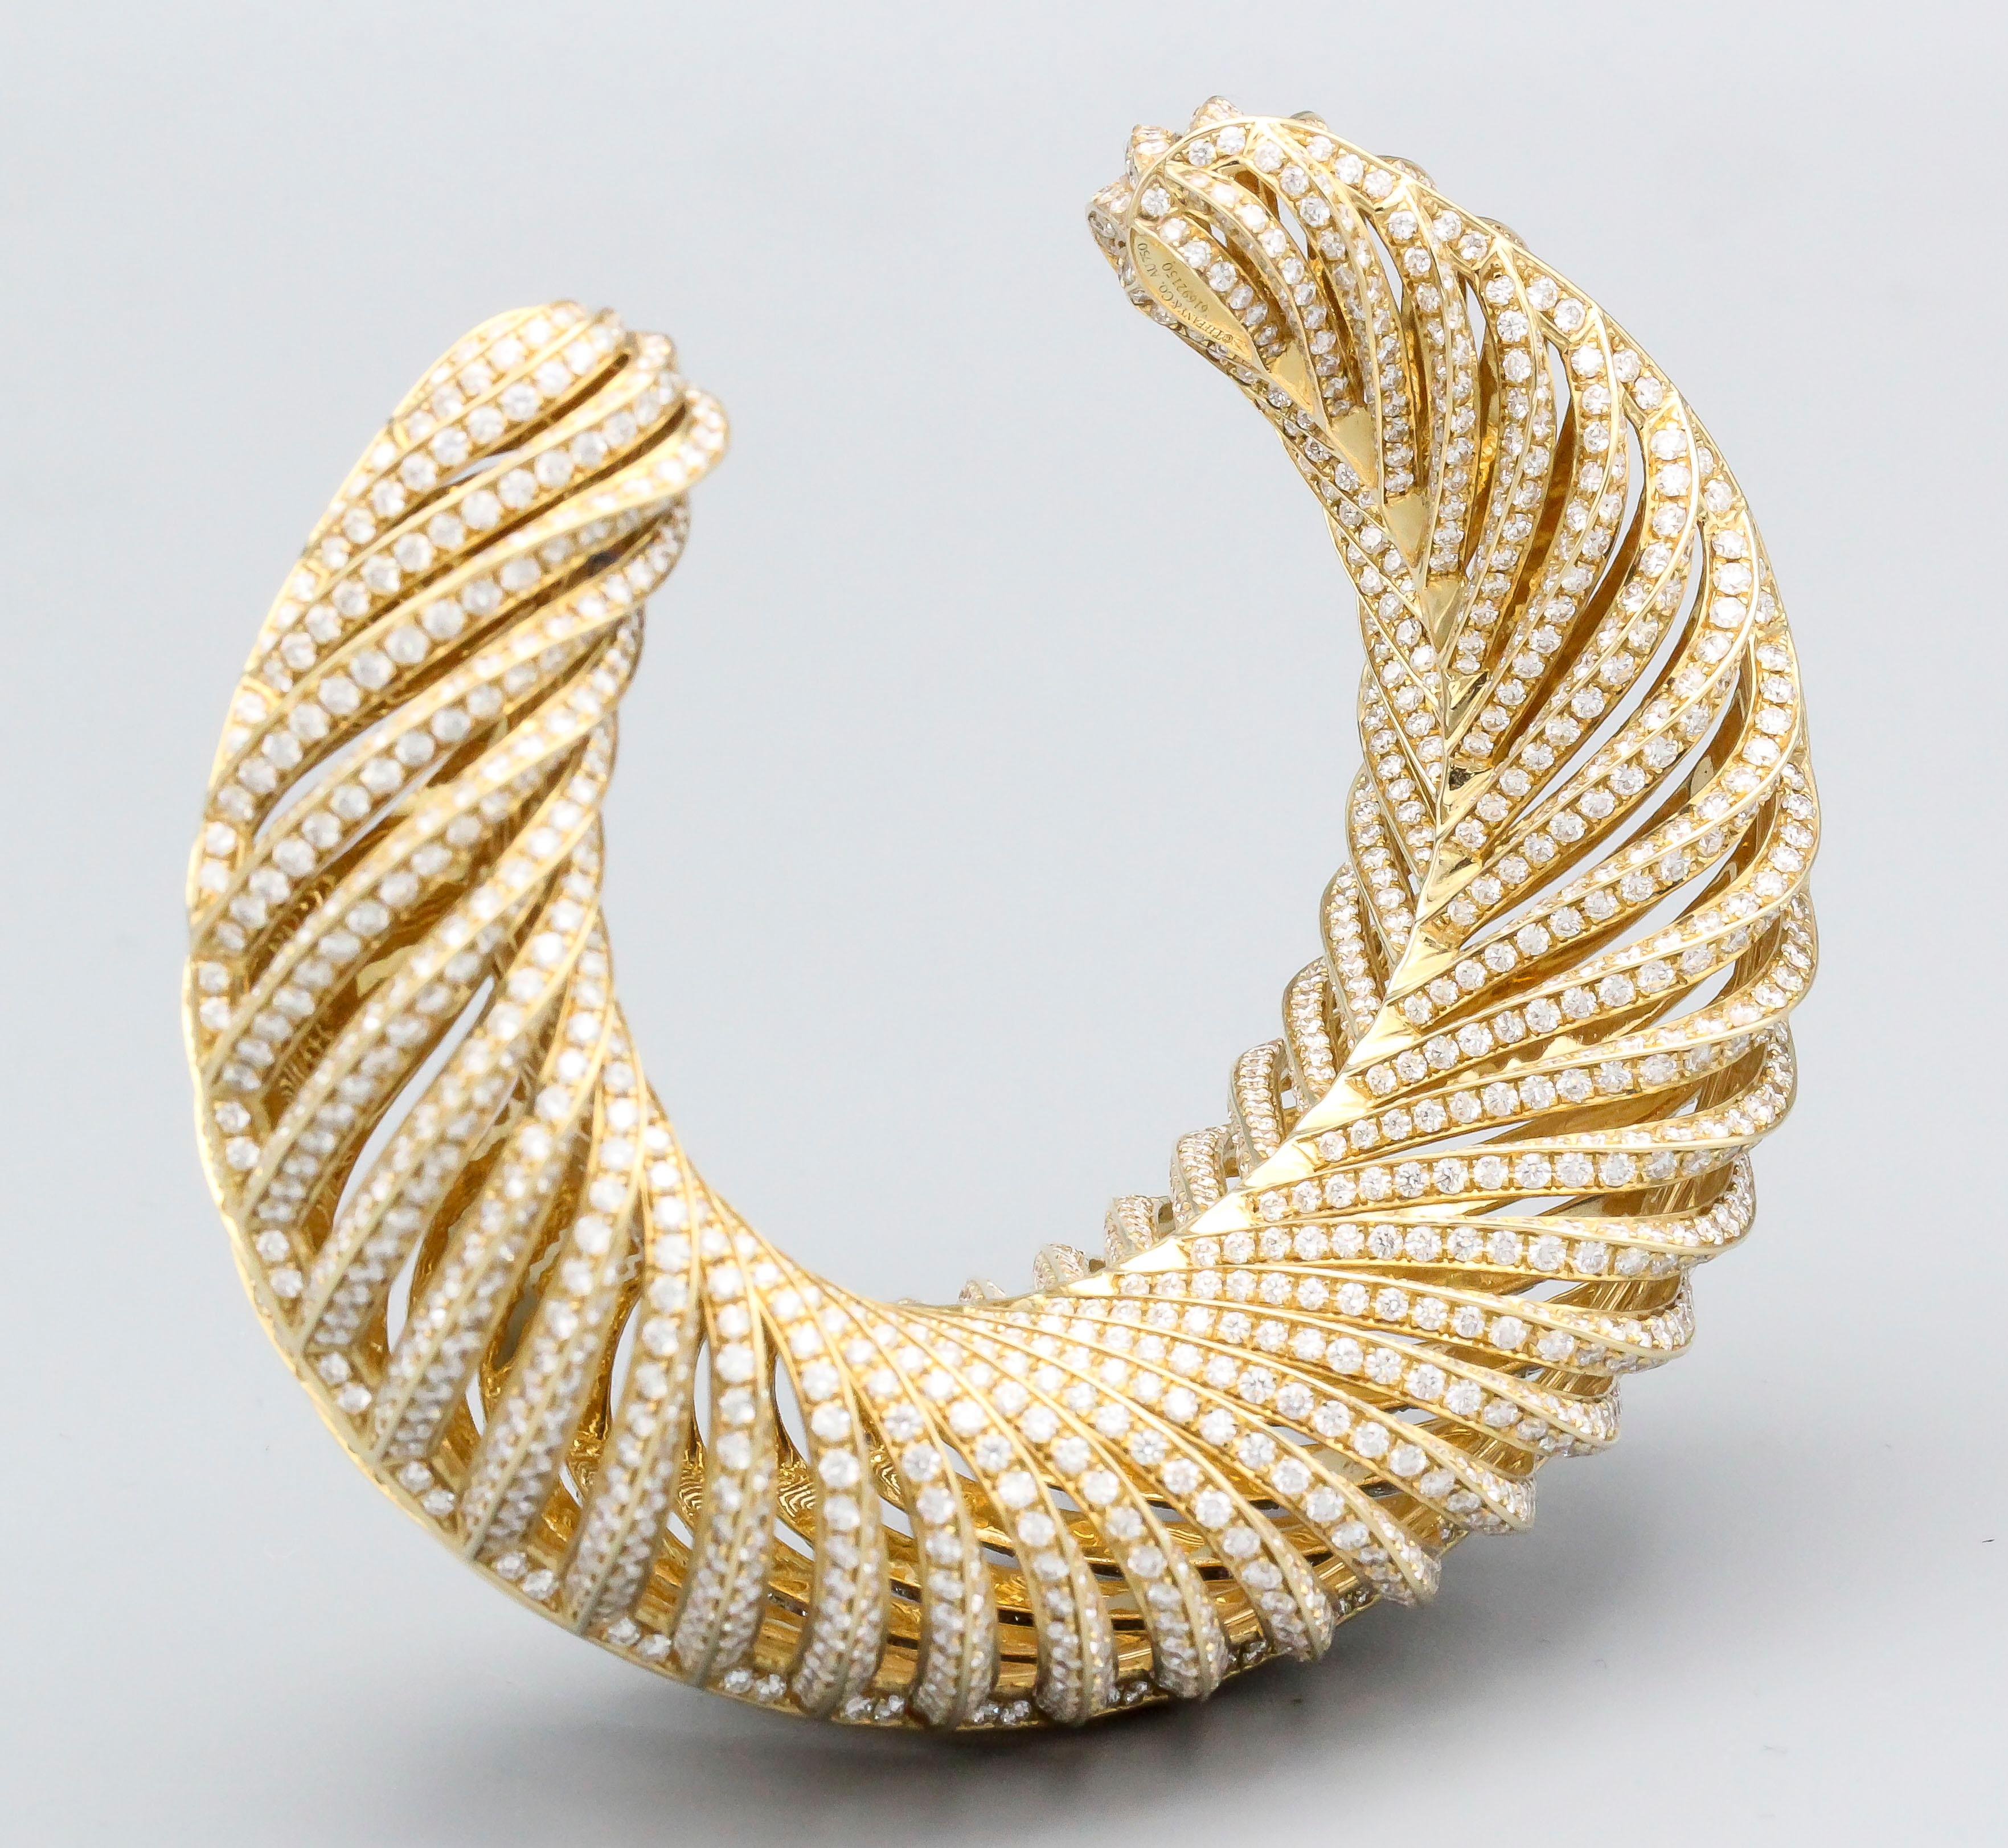 Tiffany & Co. Diamond 18k Gold Feather-Like Cuff Bracelet In Excellent Condition For Sale In New York, NY